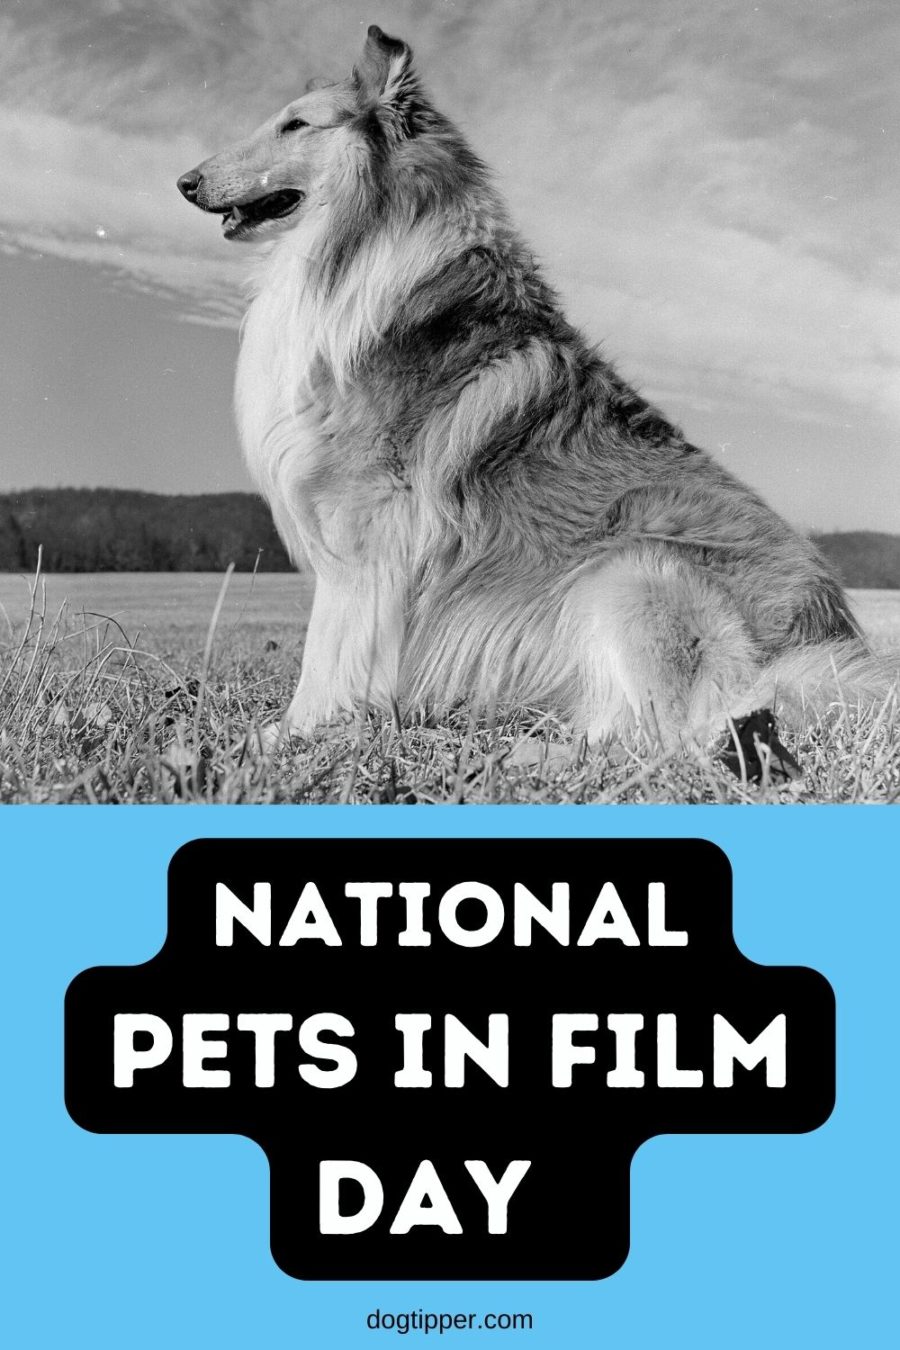 National Pets in Film Day